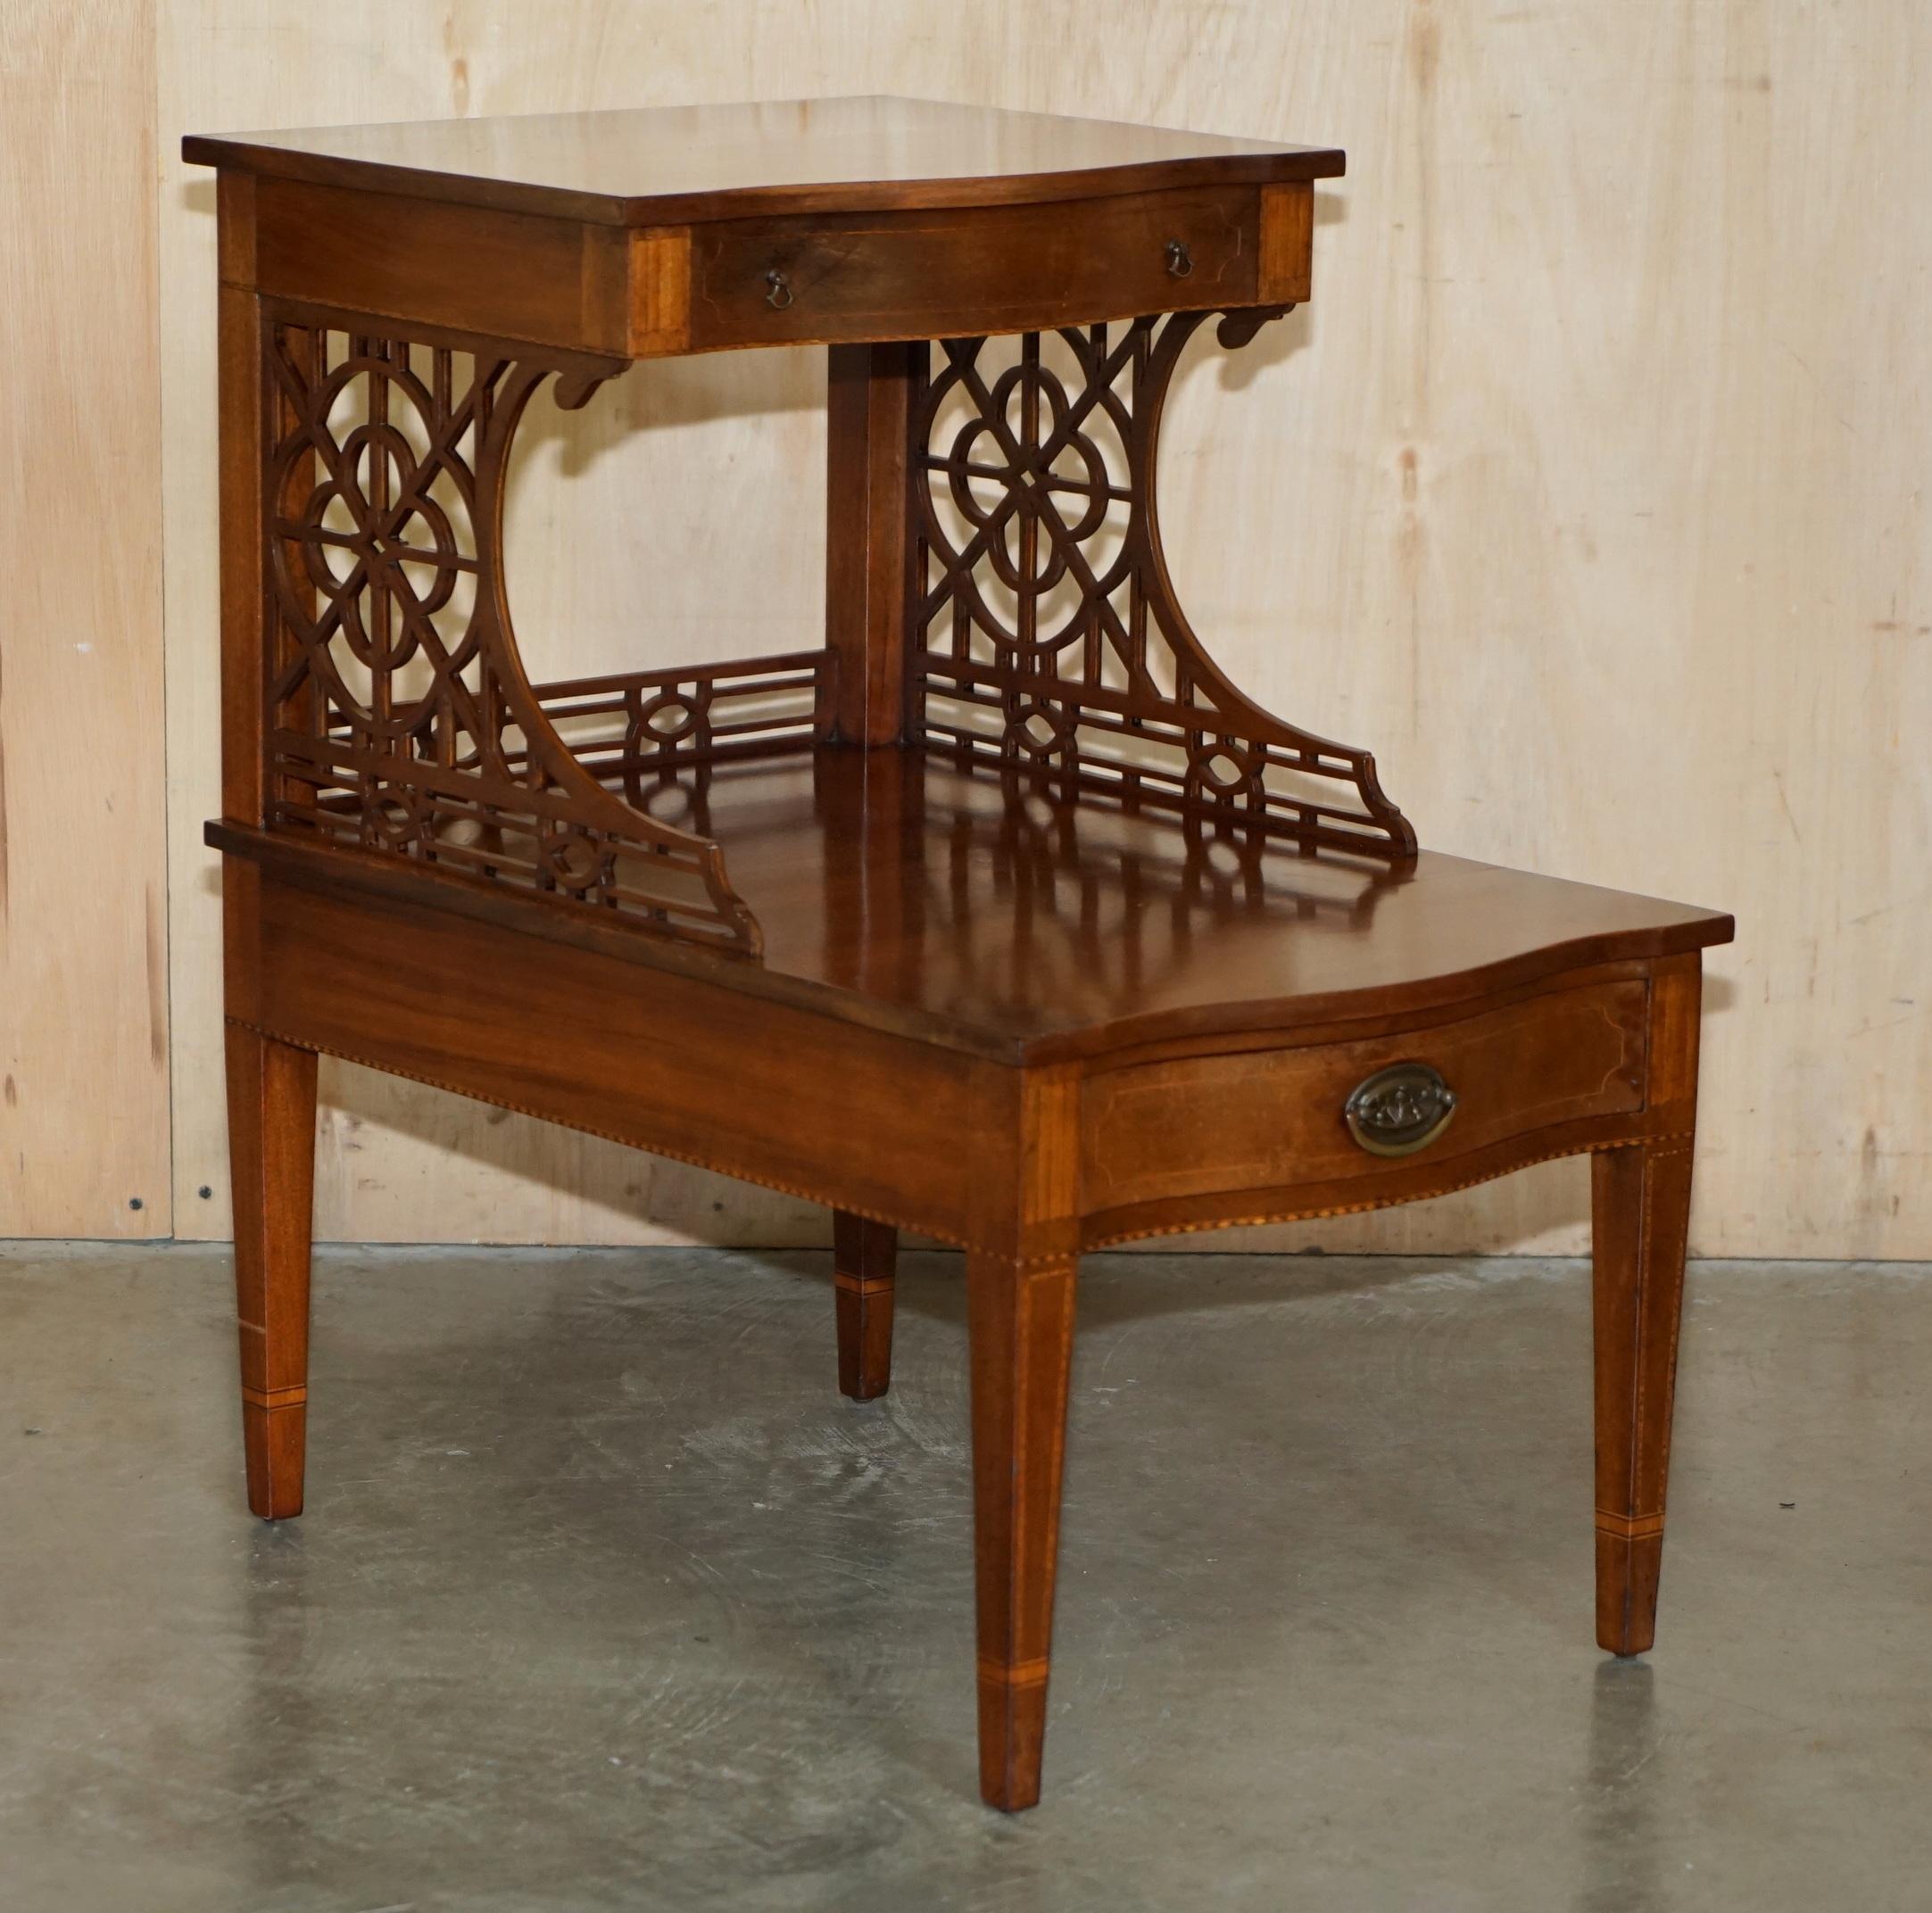 Royal House Antiques

Royal House Antiques is delighted to offer for sale this stunning pair of super rare, Thomas Chippendale Fret Work carved side end tables with sublime, Sheraton Revival style inlay

Please note the delivery fee listed is just a